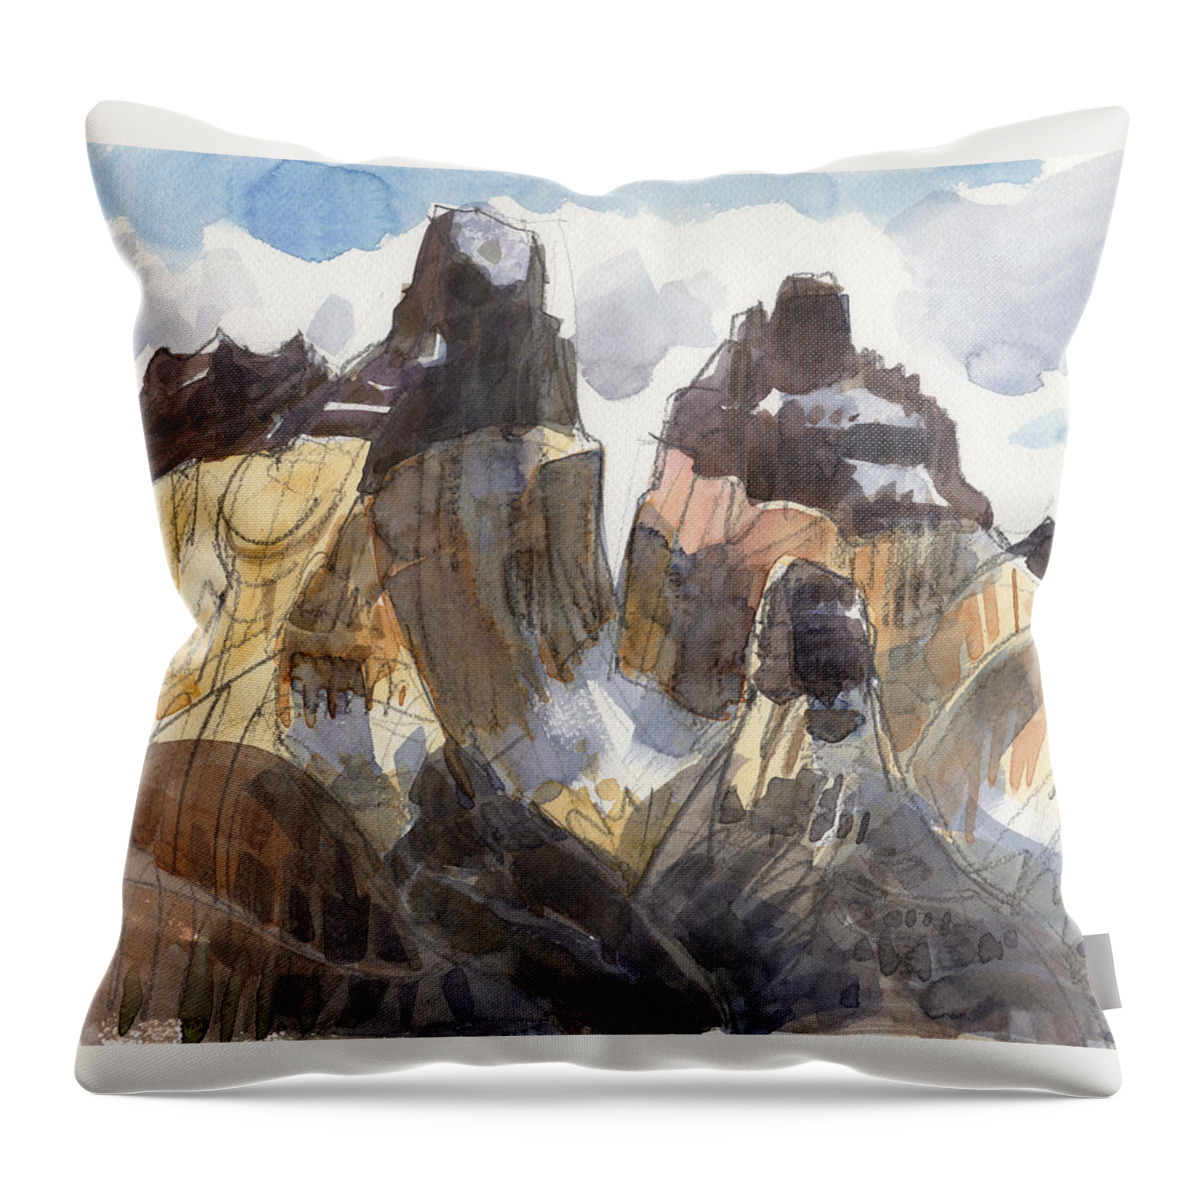 Landscape Throw Pillow featuring the painting Torres Del Paine, Chile by Judith Kunzle